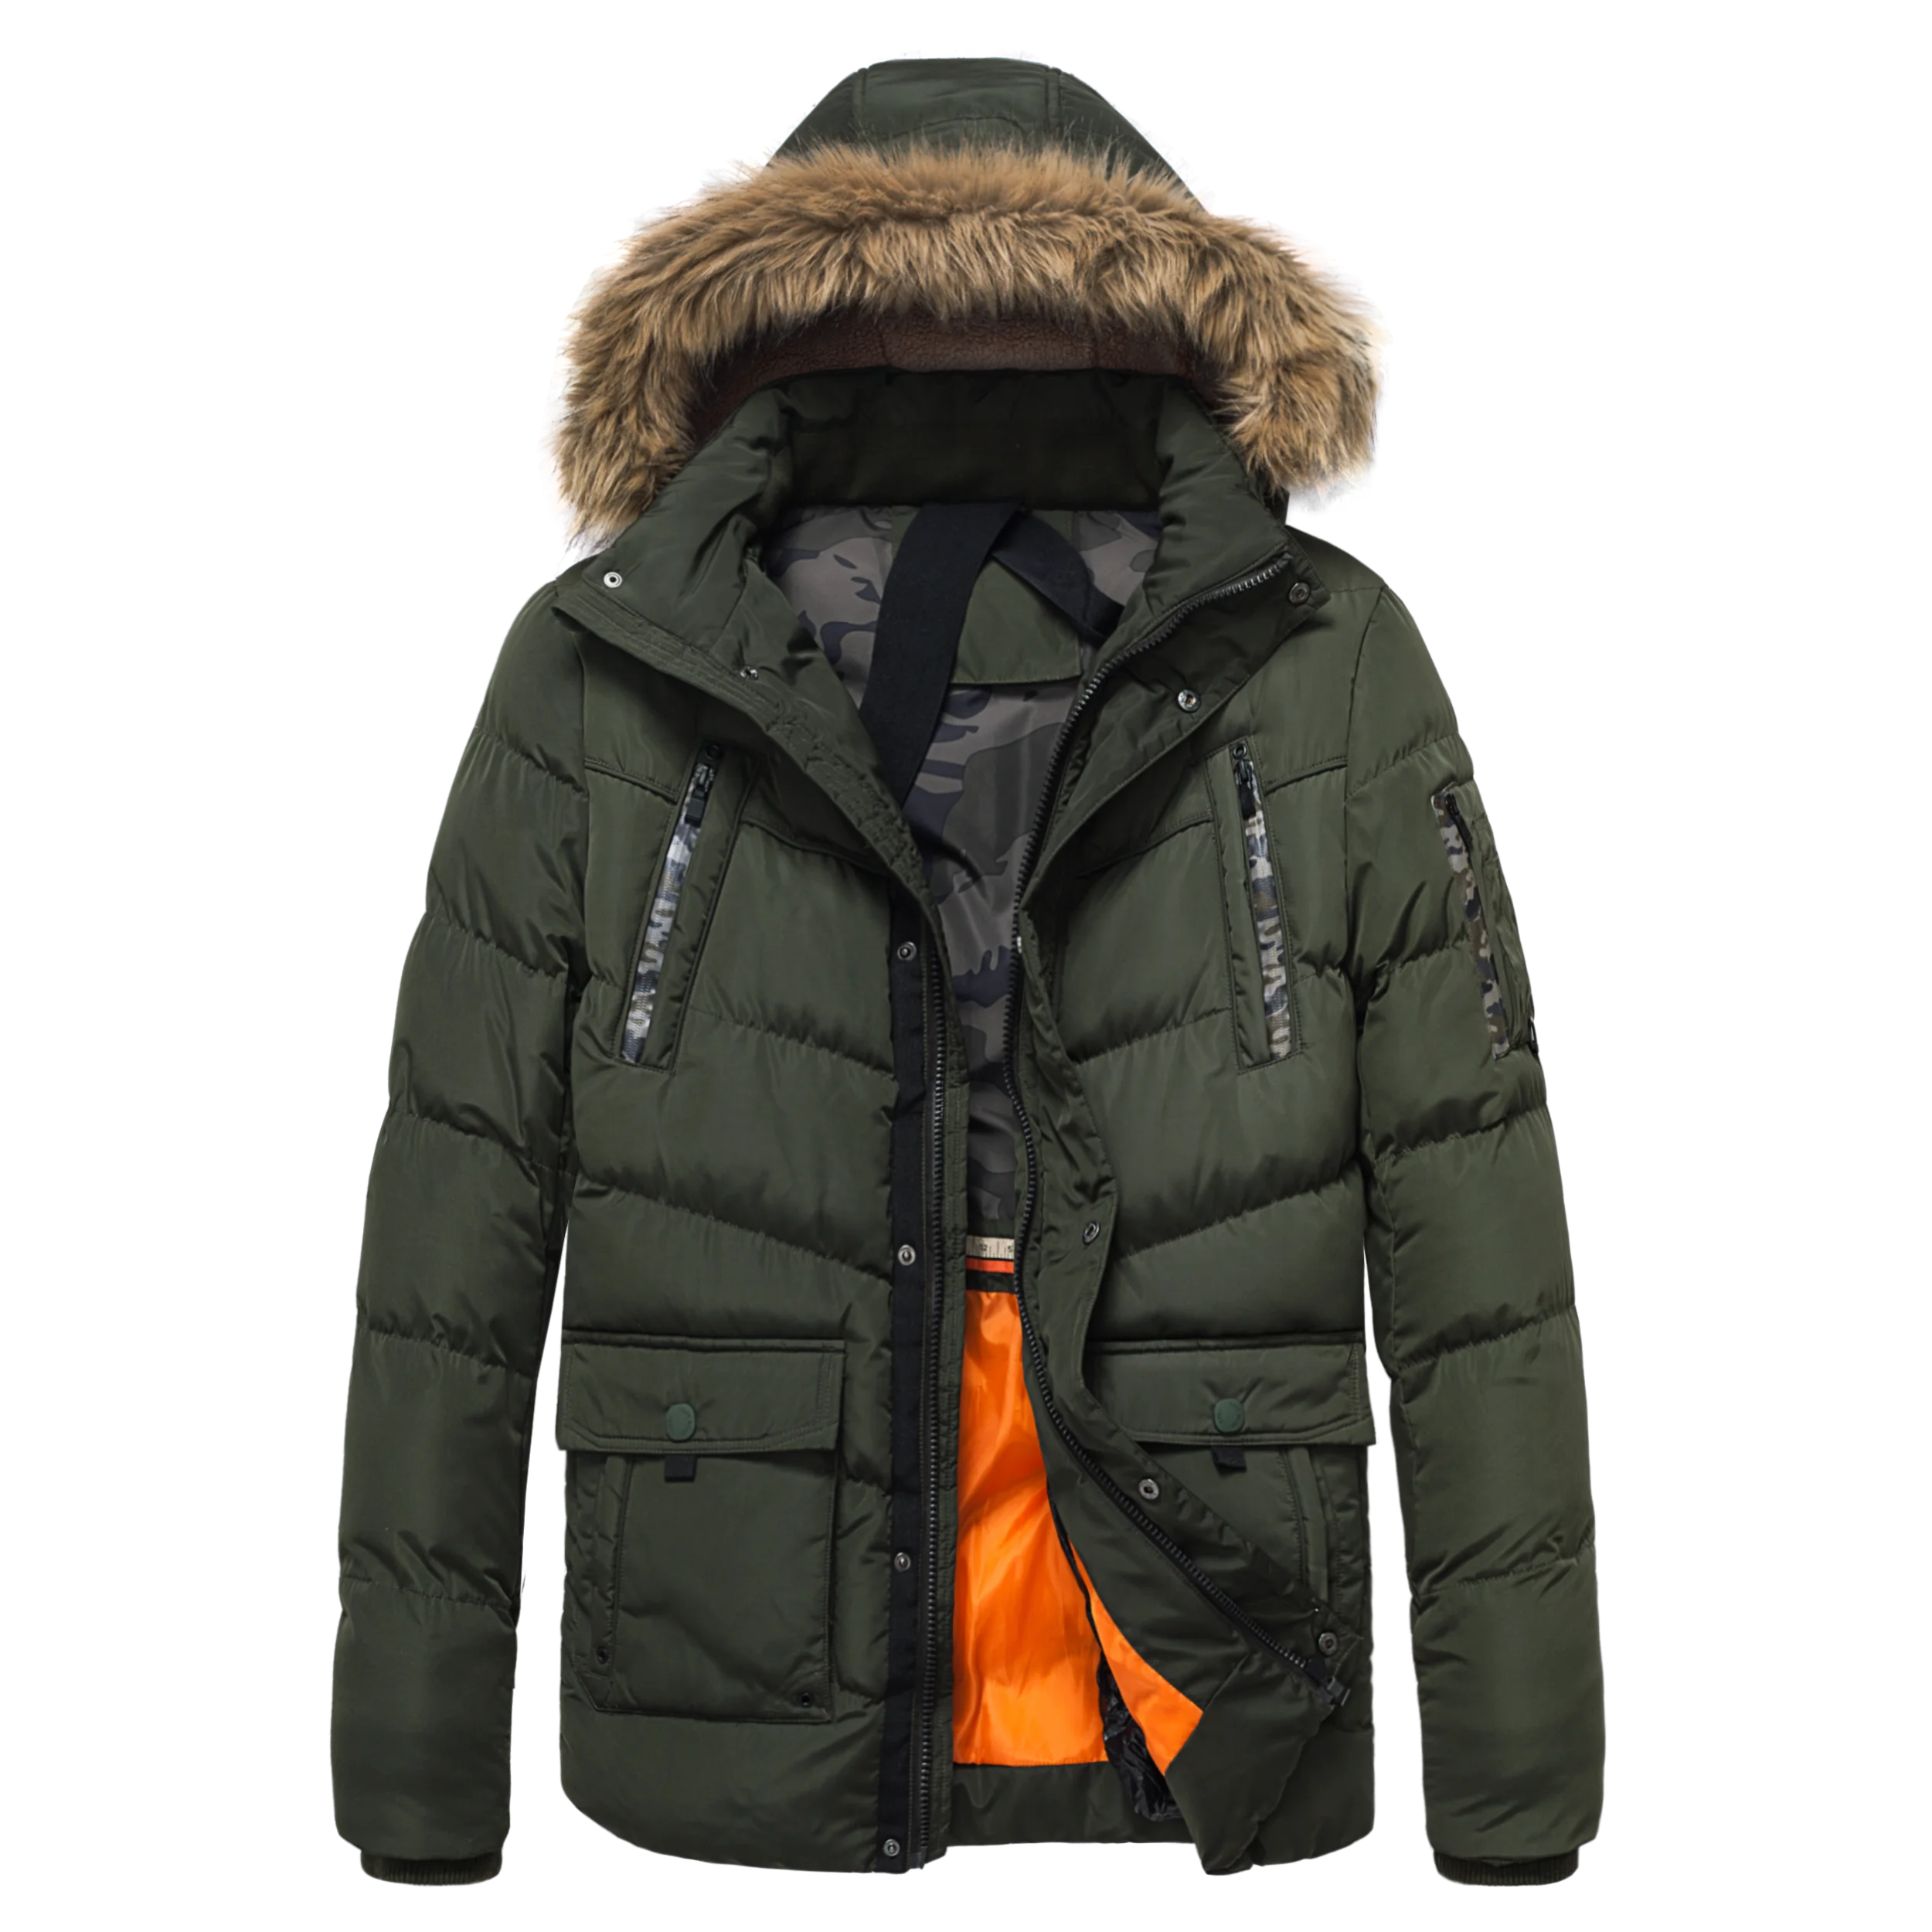 Clear Puffer Coats & Jackets for Men